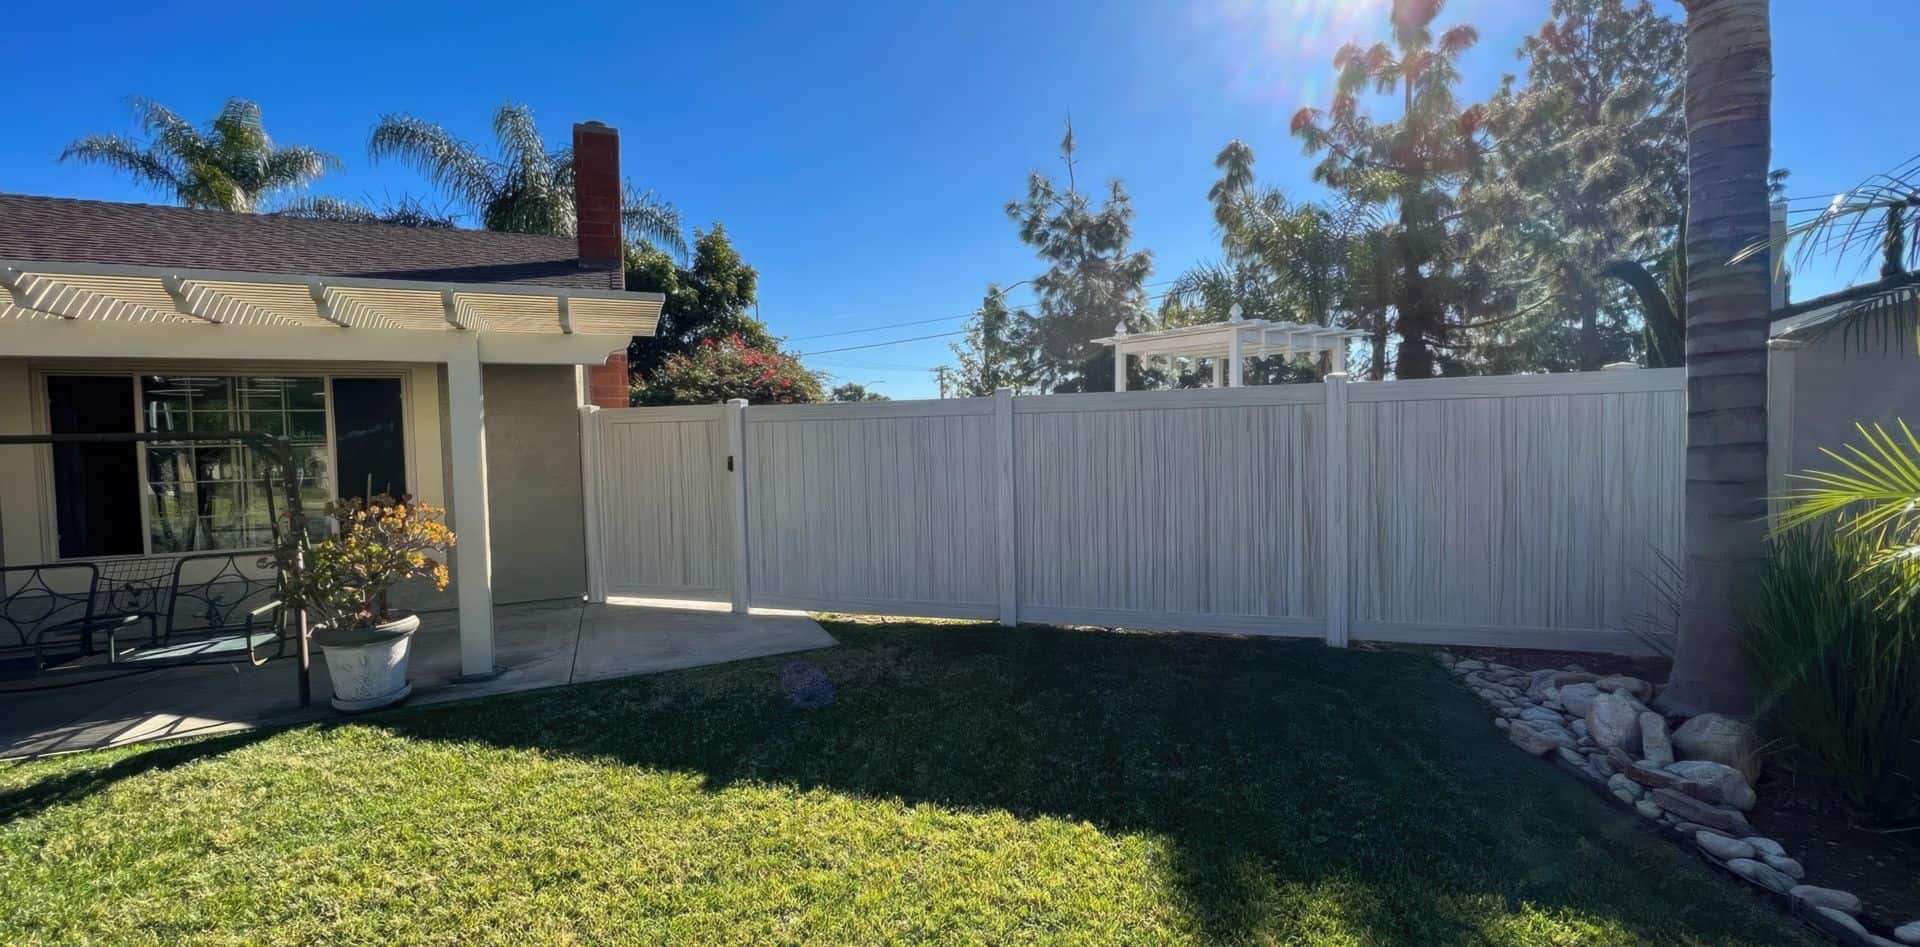 Vinyl weathered aspen colored fence in backyard with lush grassy lawn, swing, and palm trees.